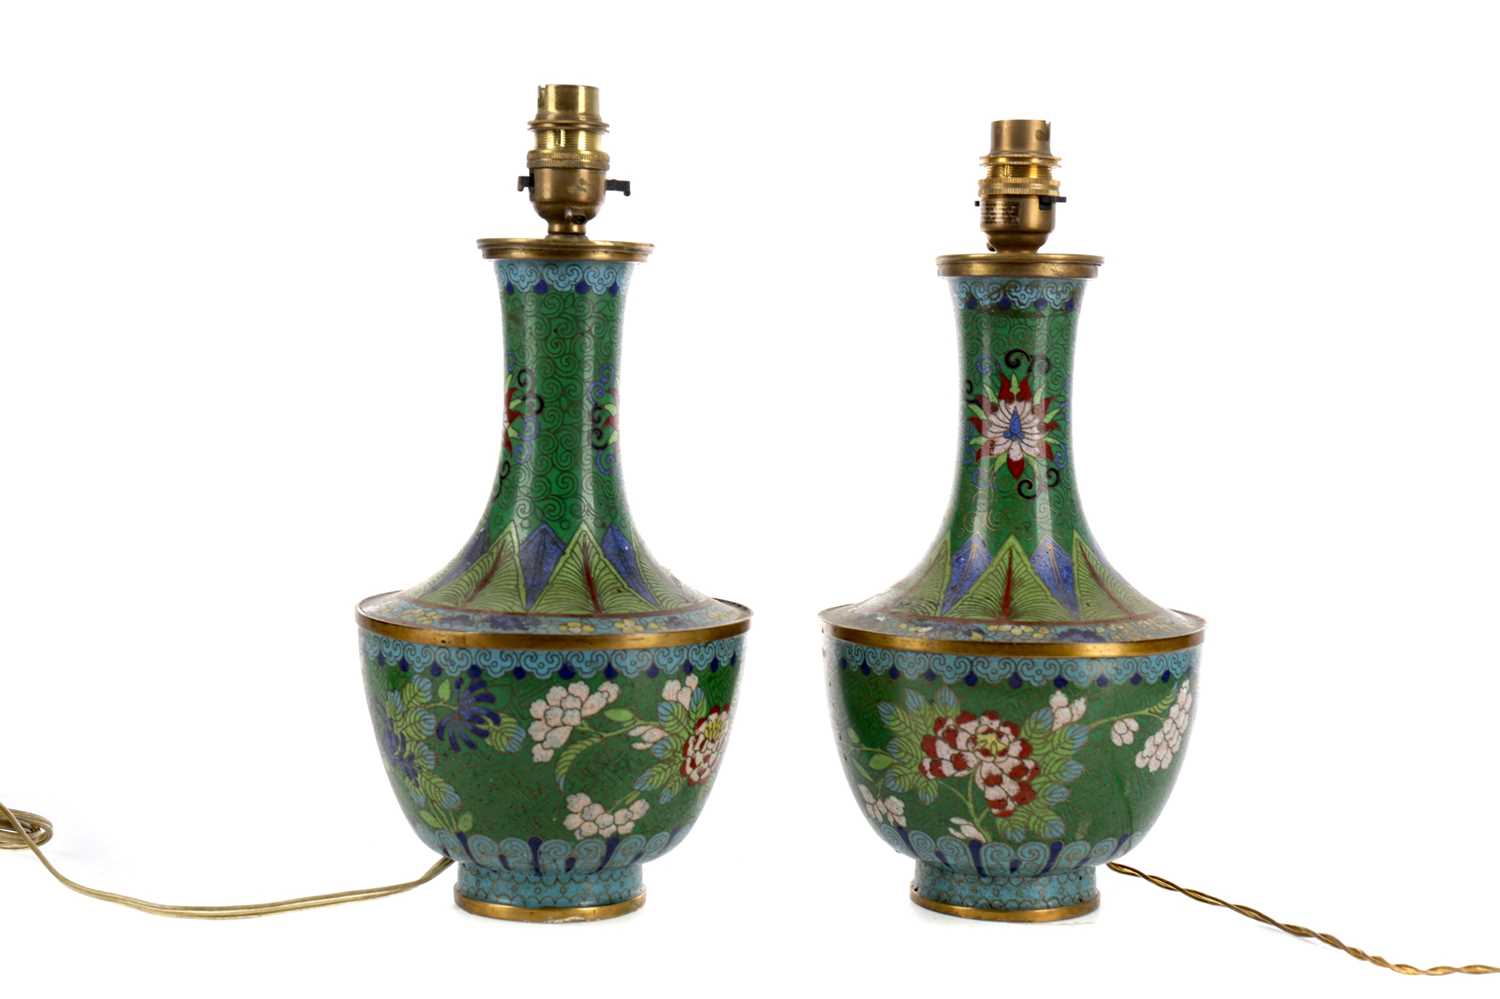 Lot 869 - A PAIR OF CHINESE CLOISONNE VASE LAMPS